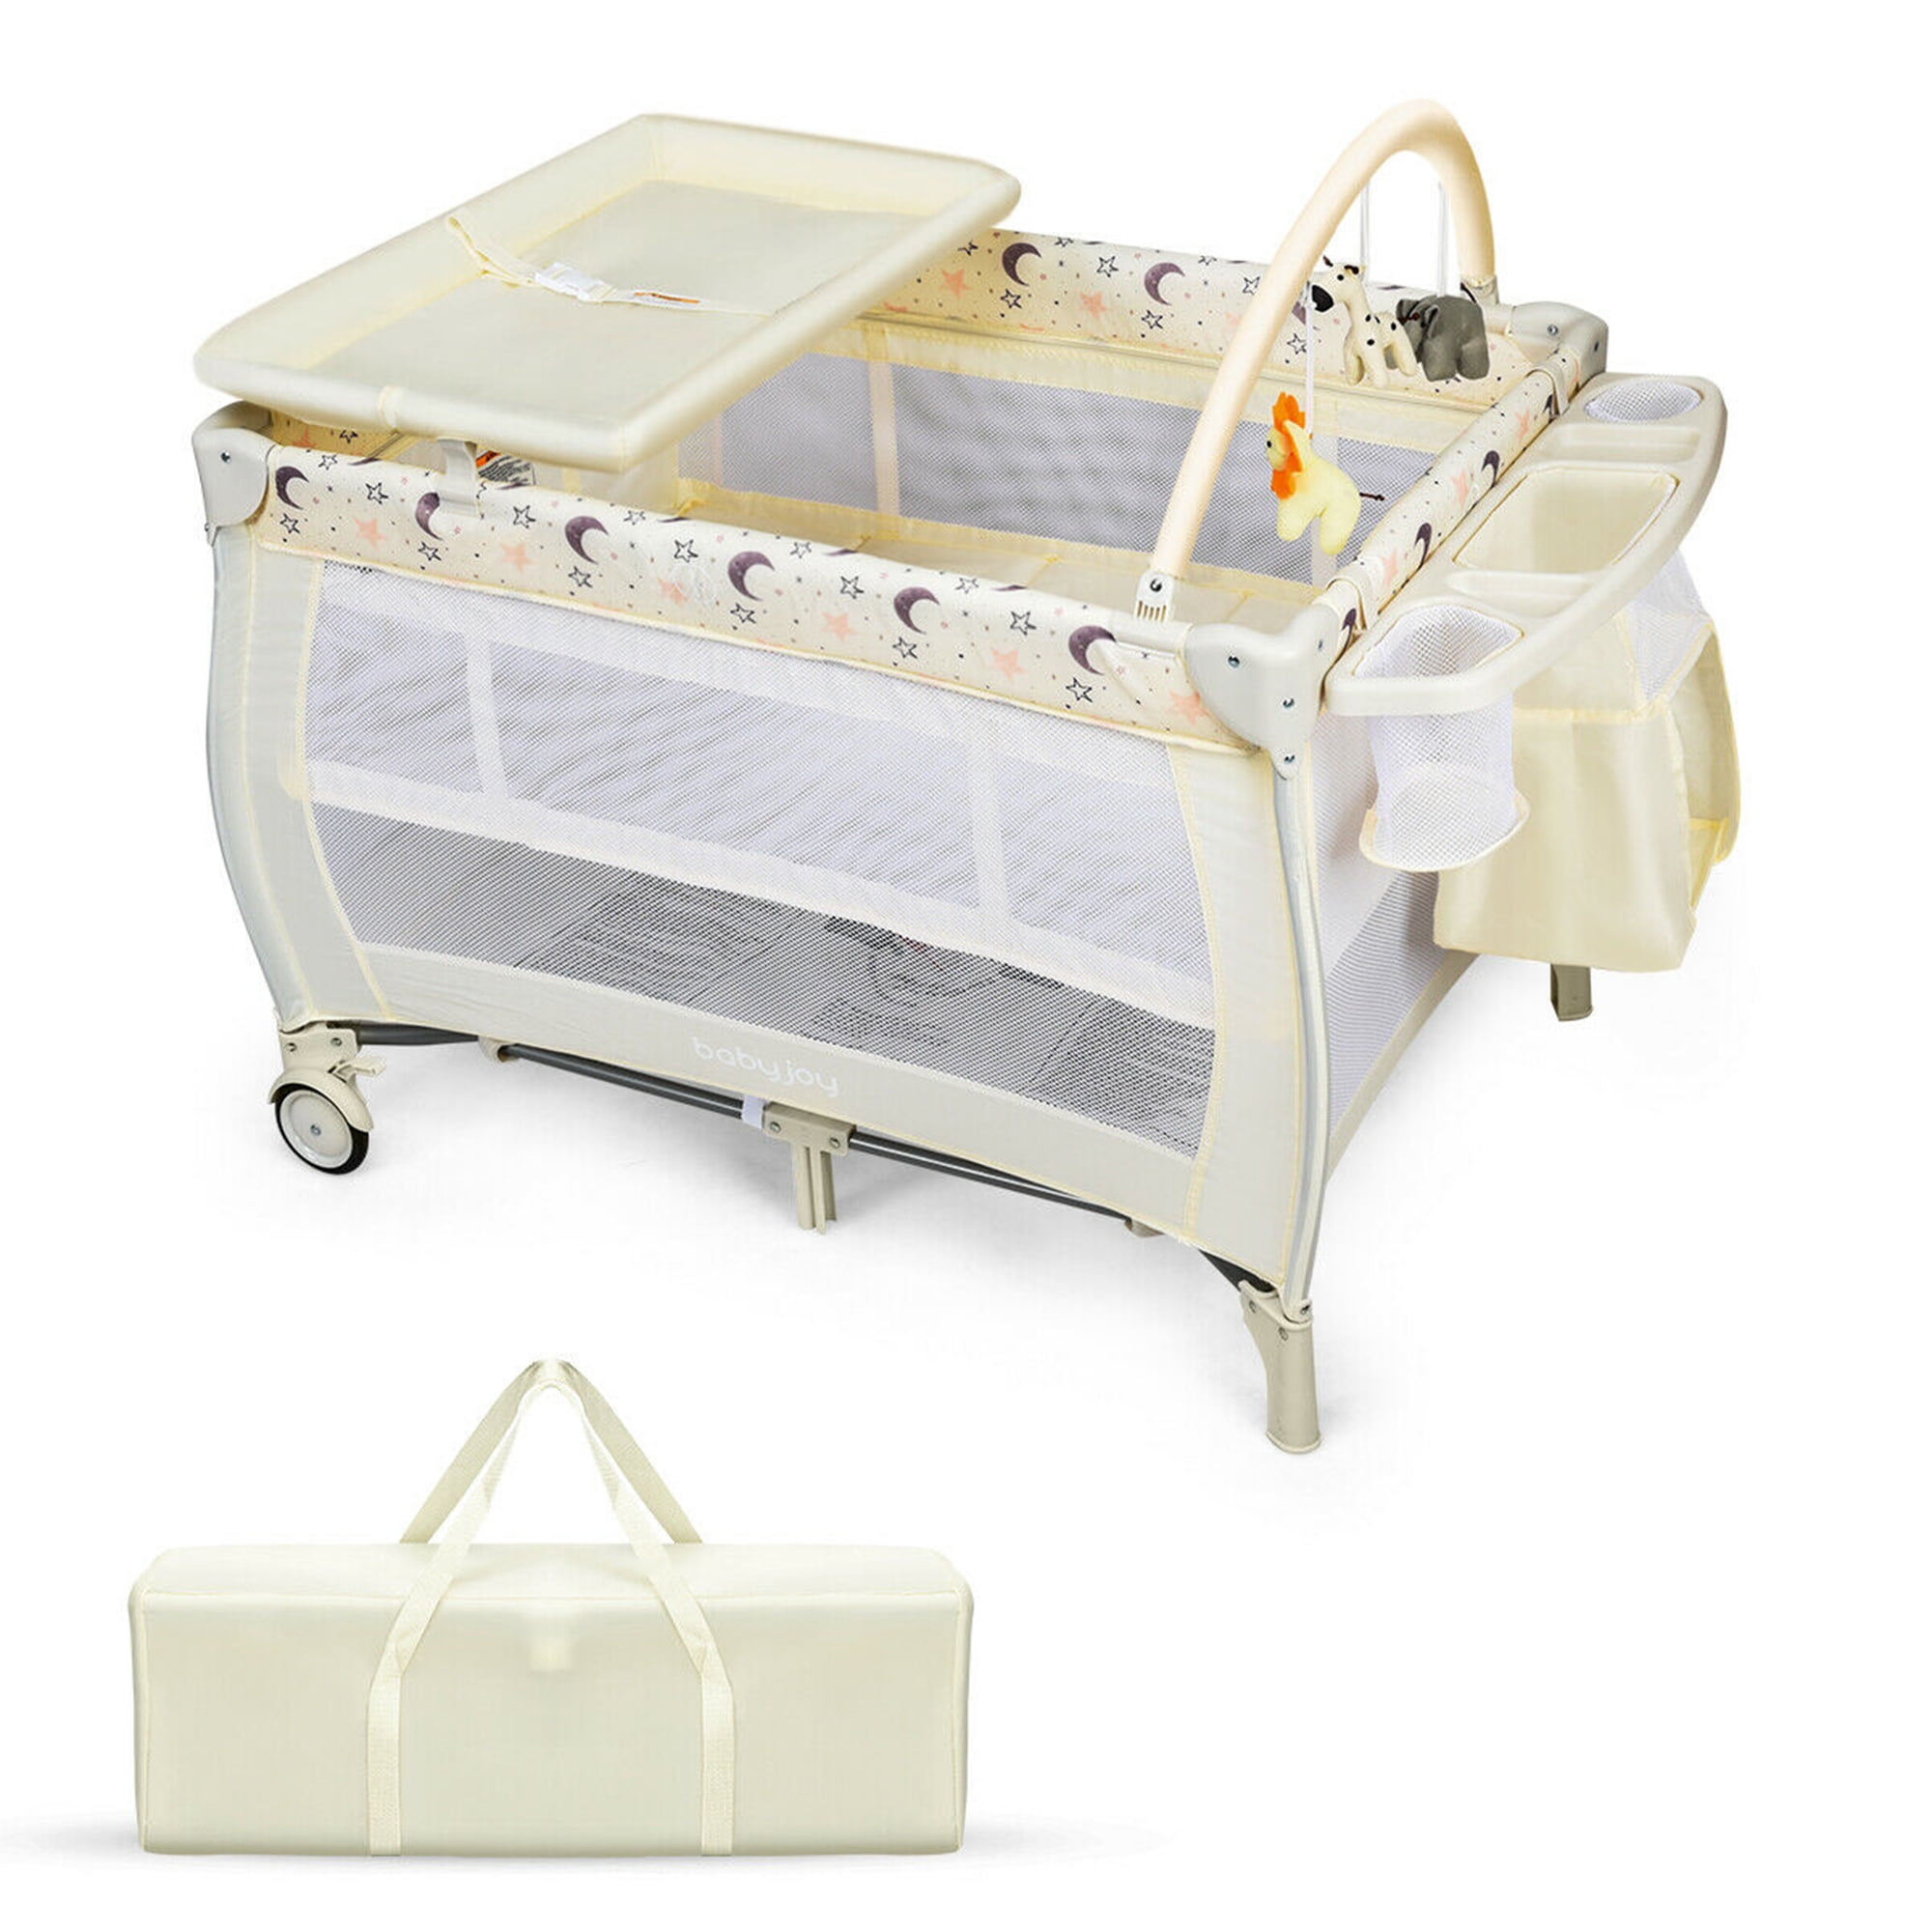 Topbuy 3 in 1 Convertible Baby Playards Portable Baby Playpen with 